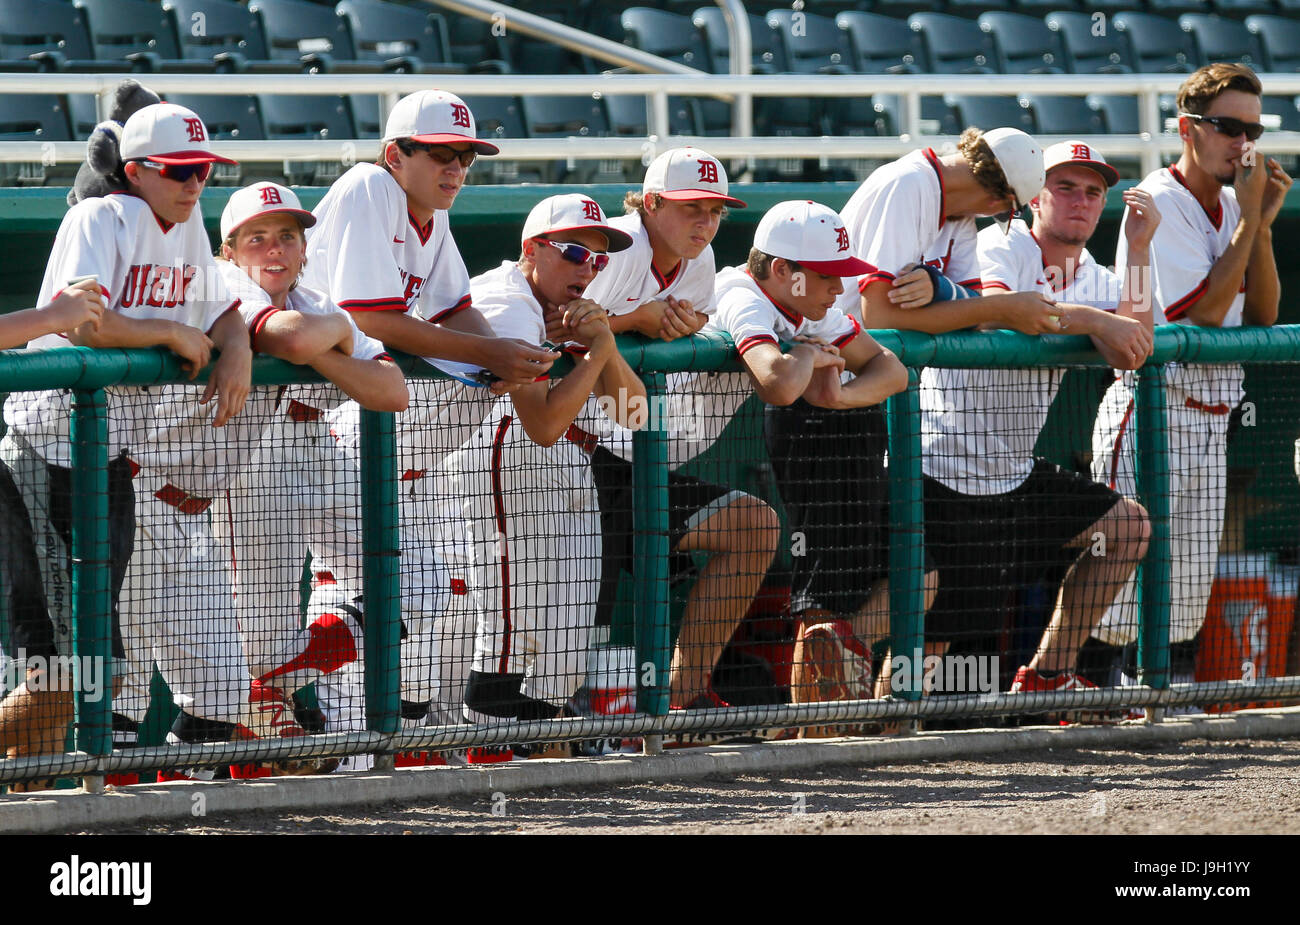 Fort Myers, Florida, USA. 1st June, 2017. MONICA HERNDON | Times.Dunedin Falcons players watch from the dugout during the sixth inning of the class 6A semifinal at Hammond Stadium in Fort Myers, Fla., on June 1, 2017. Jesuit defeated Dunedin 7 to 0. Credit: Monica Herndon/Tampa Bay Times/ZUMA Wire/Alamy Live News Stock Photo